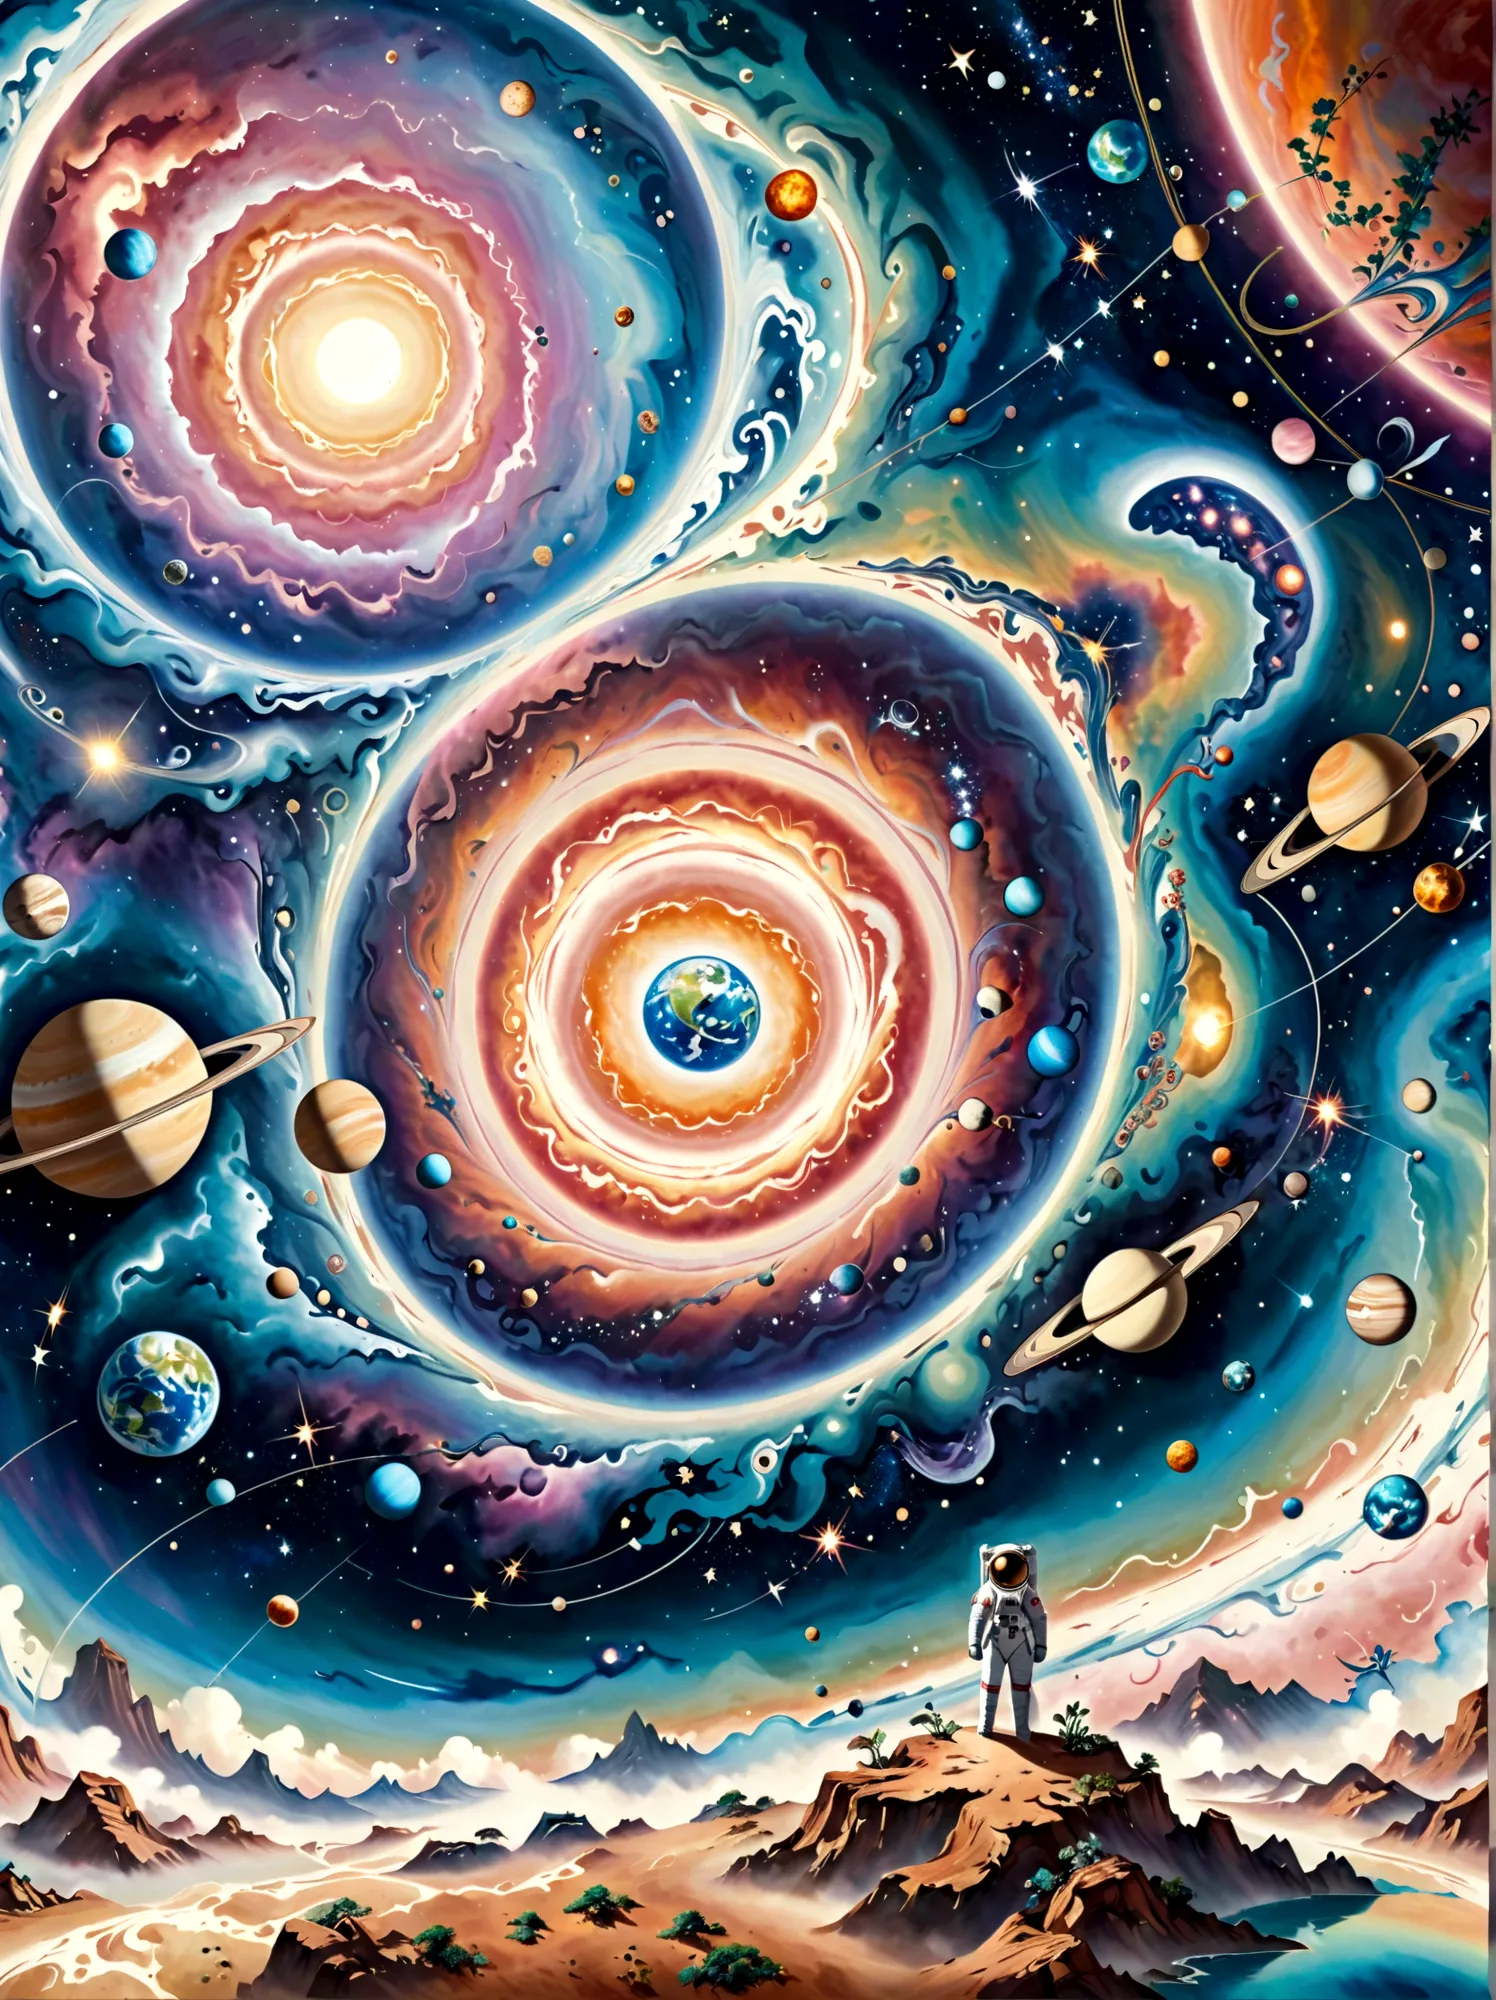 Imagine a surreal perspective of space exploration. There's an astronaut on an abstract shaped planet with swirling colors of co...